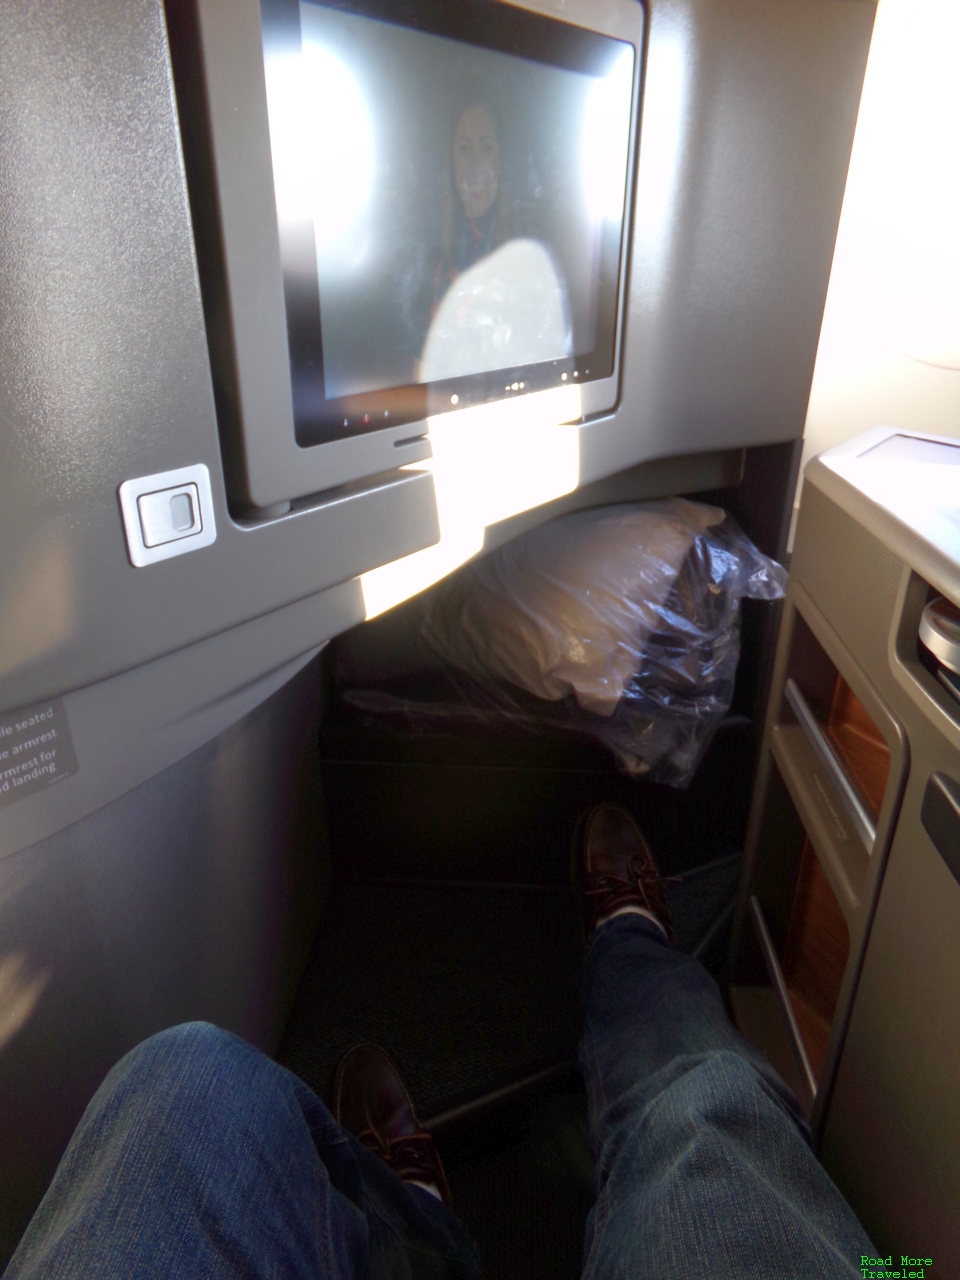 American Airlines A321T First Class seat - legroom and pitch